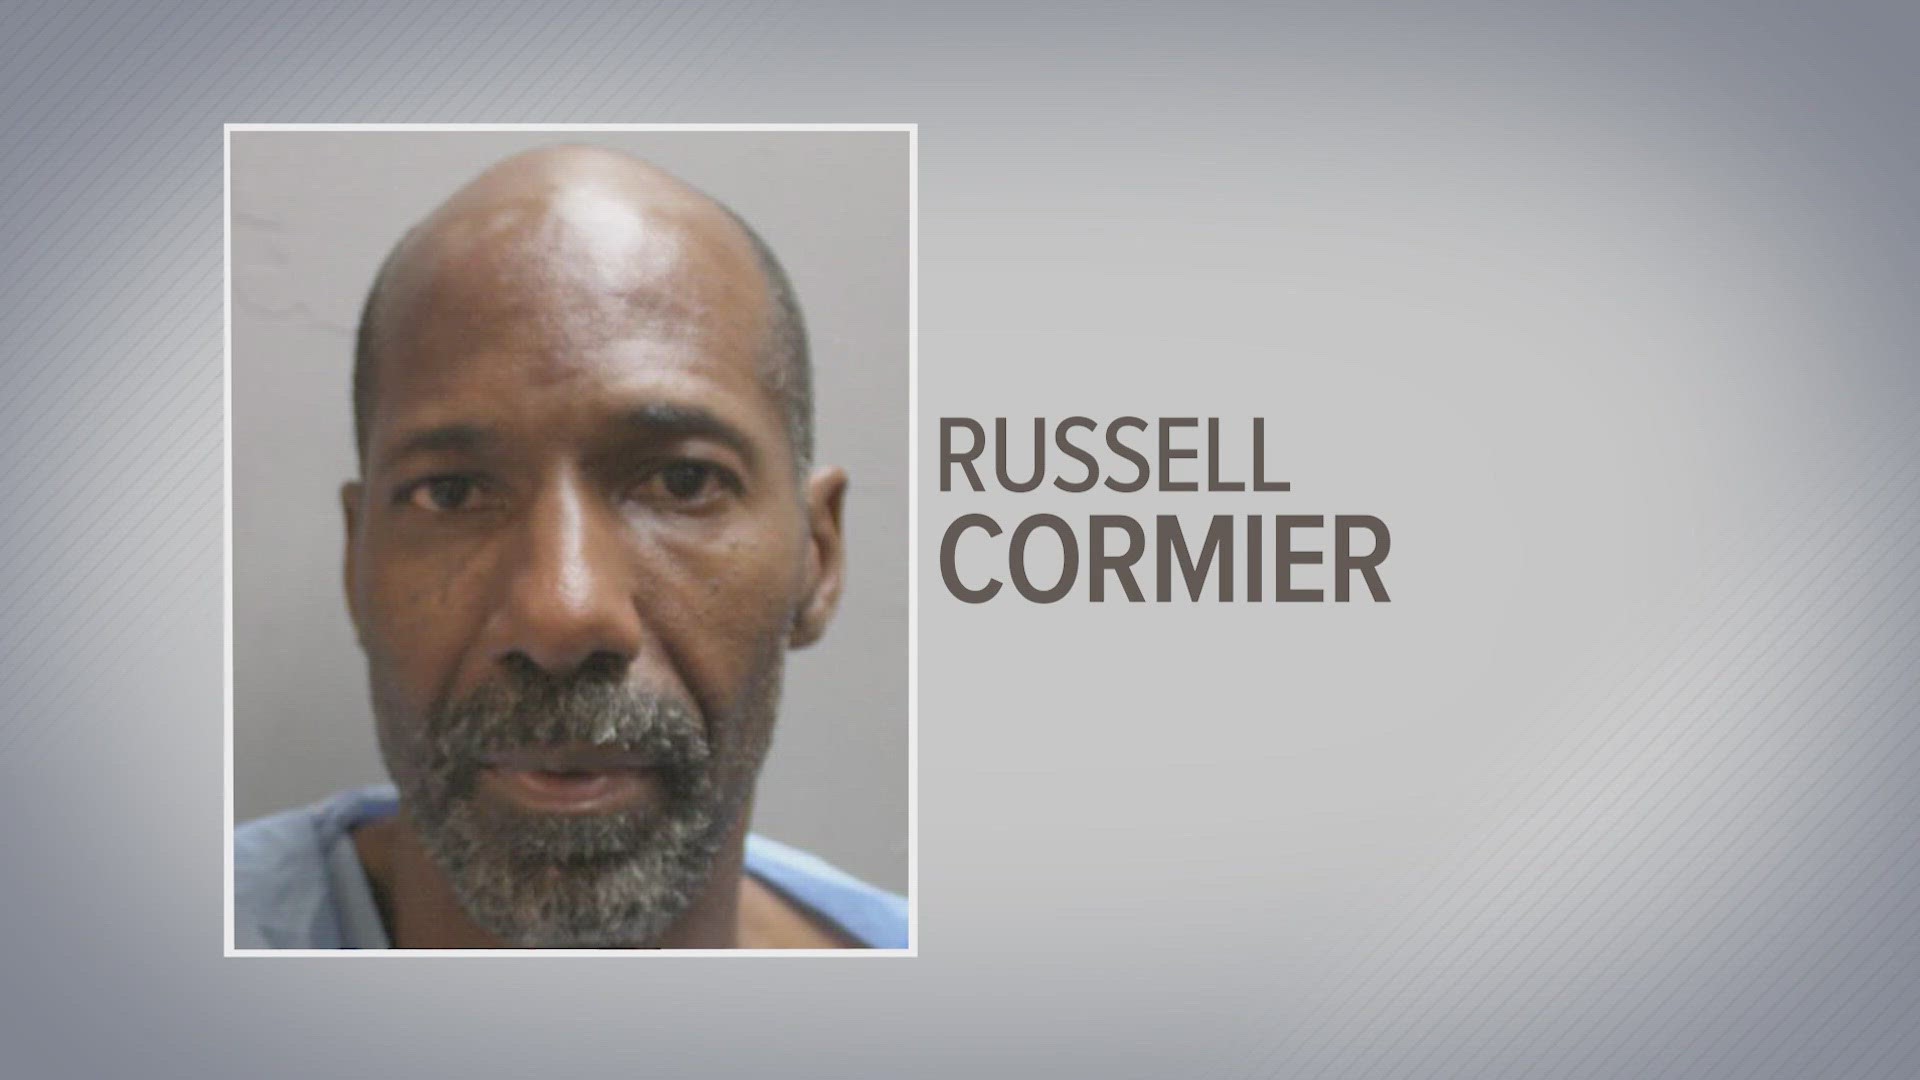 Russell Cormier shot and killed his ex-wife and a former co-worker and also shot his neighbor in the stomach and set his own trailer on fire in 2017.